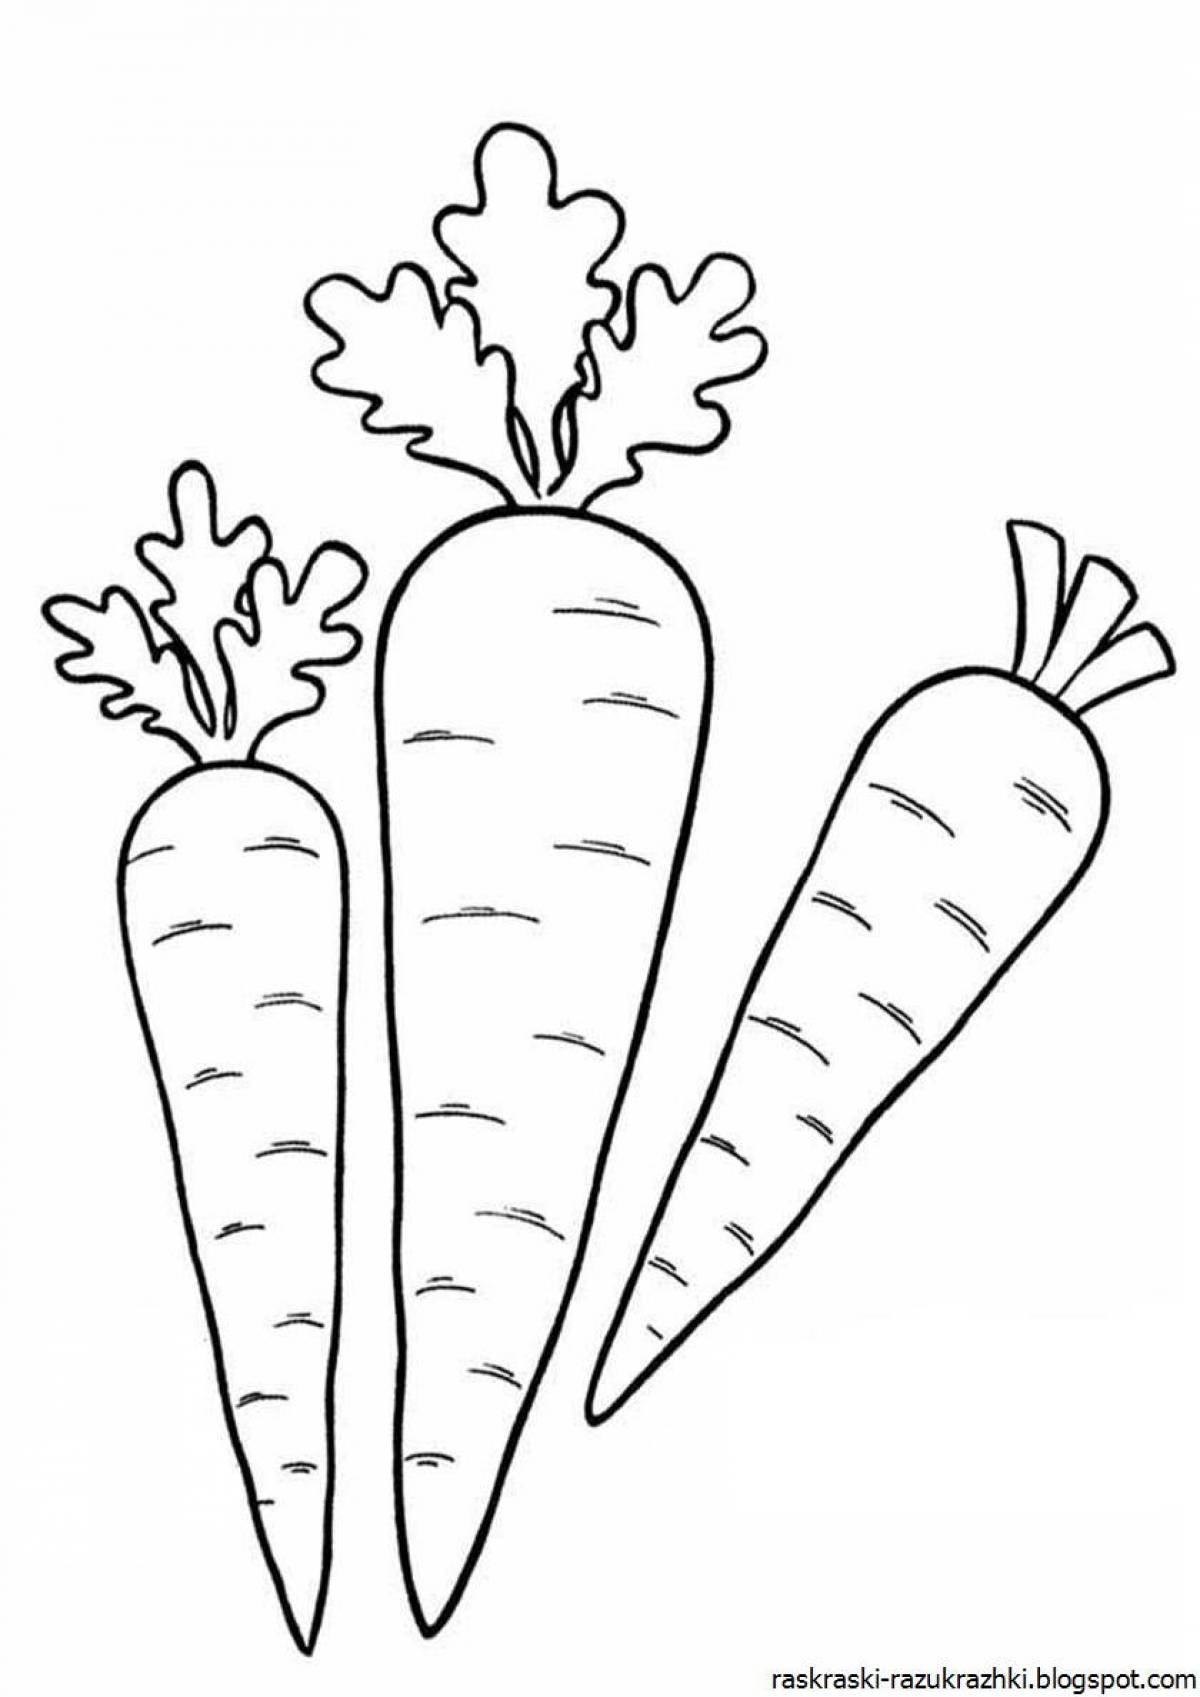 Funny carrot coloring book for kids